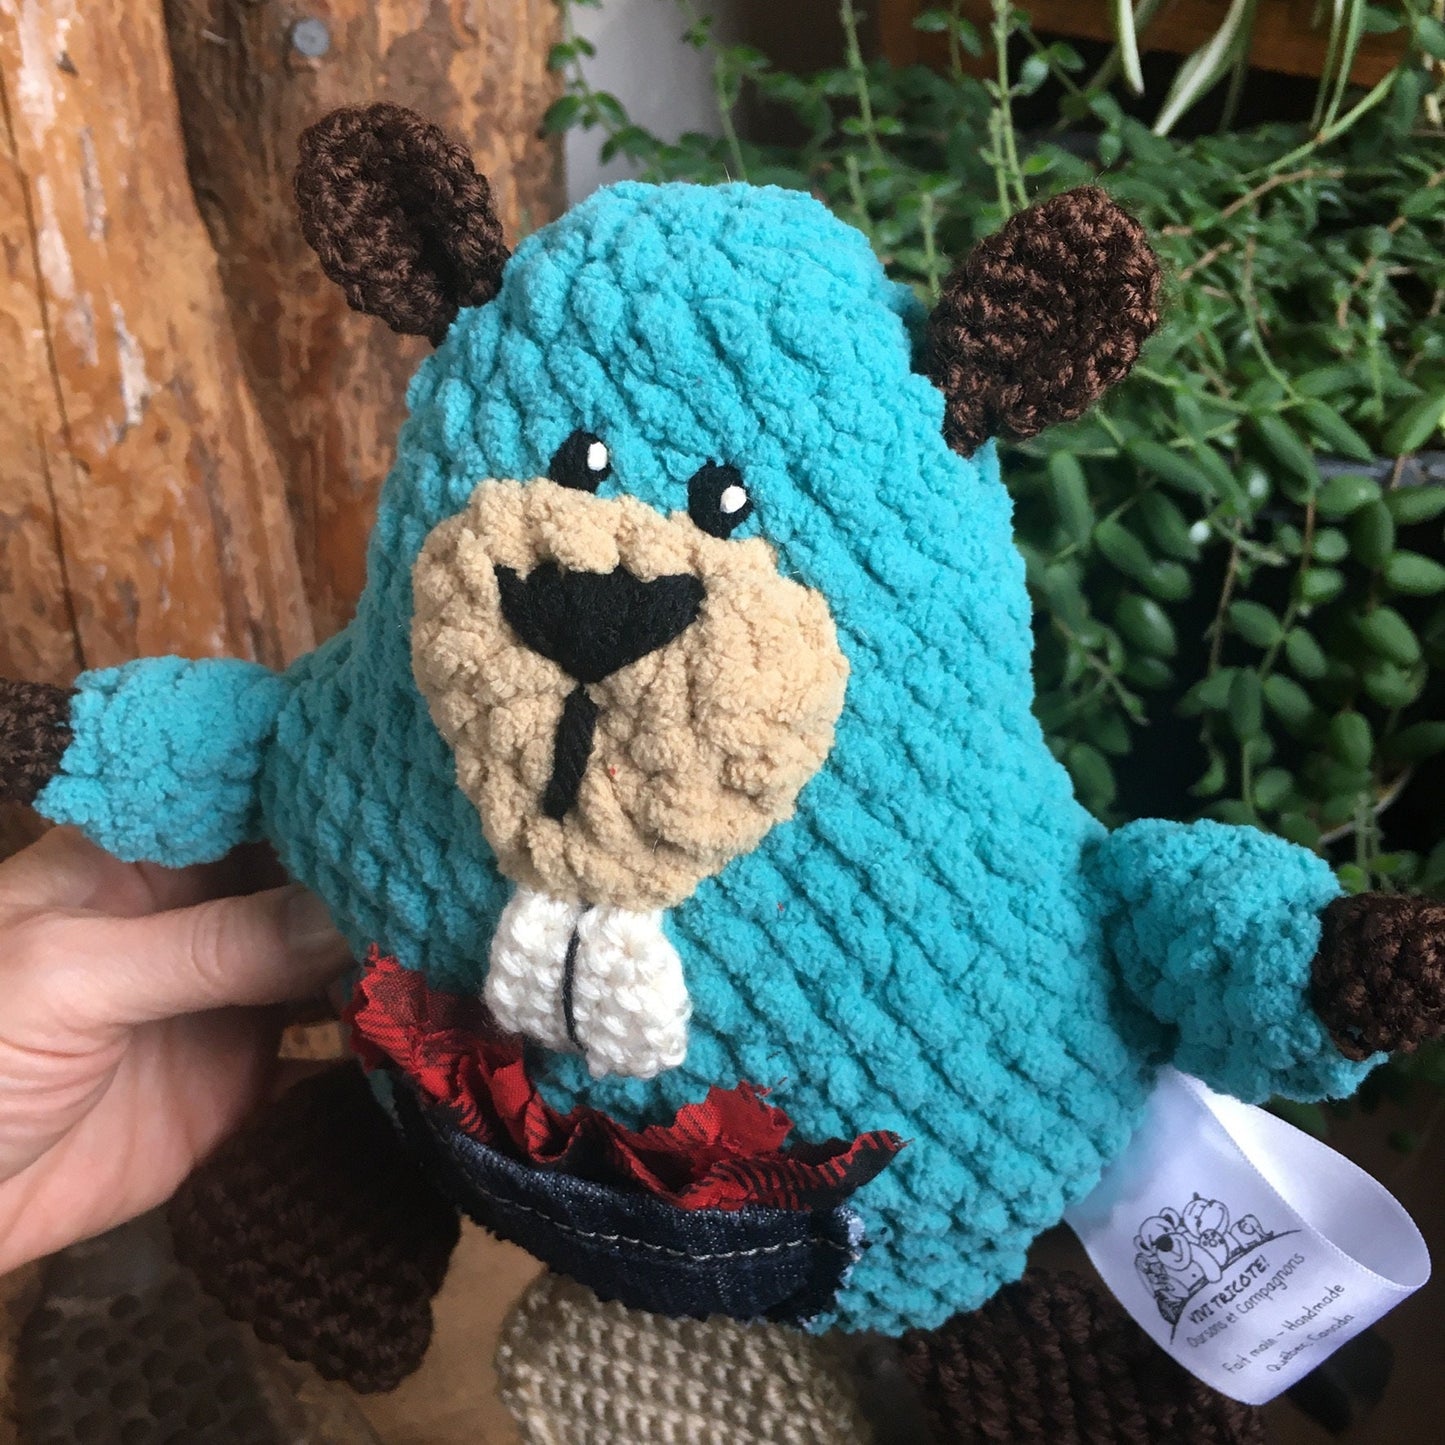 TIMÉO THE BABY BEAVER turquoise, beige and chocolate.  Tooth fairy friend, plush amigurumi stuffed animal from the boreal forest